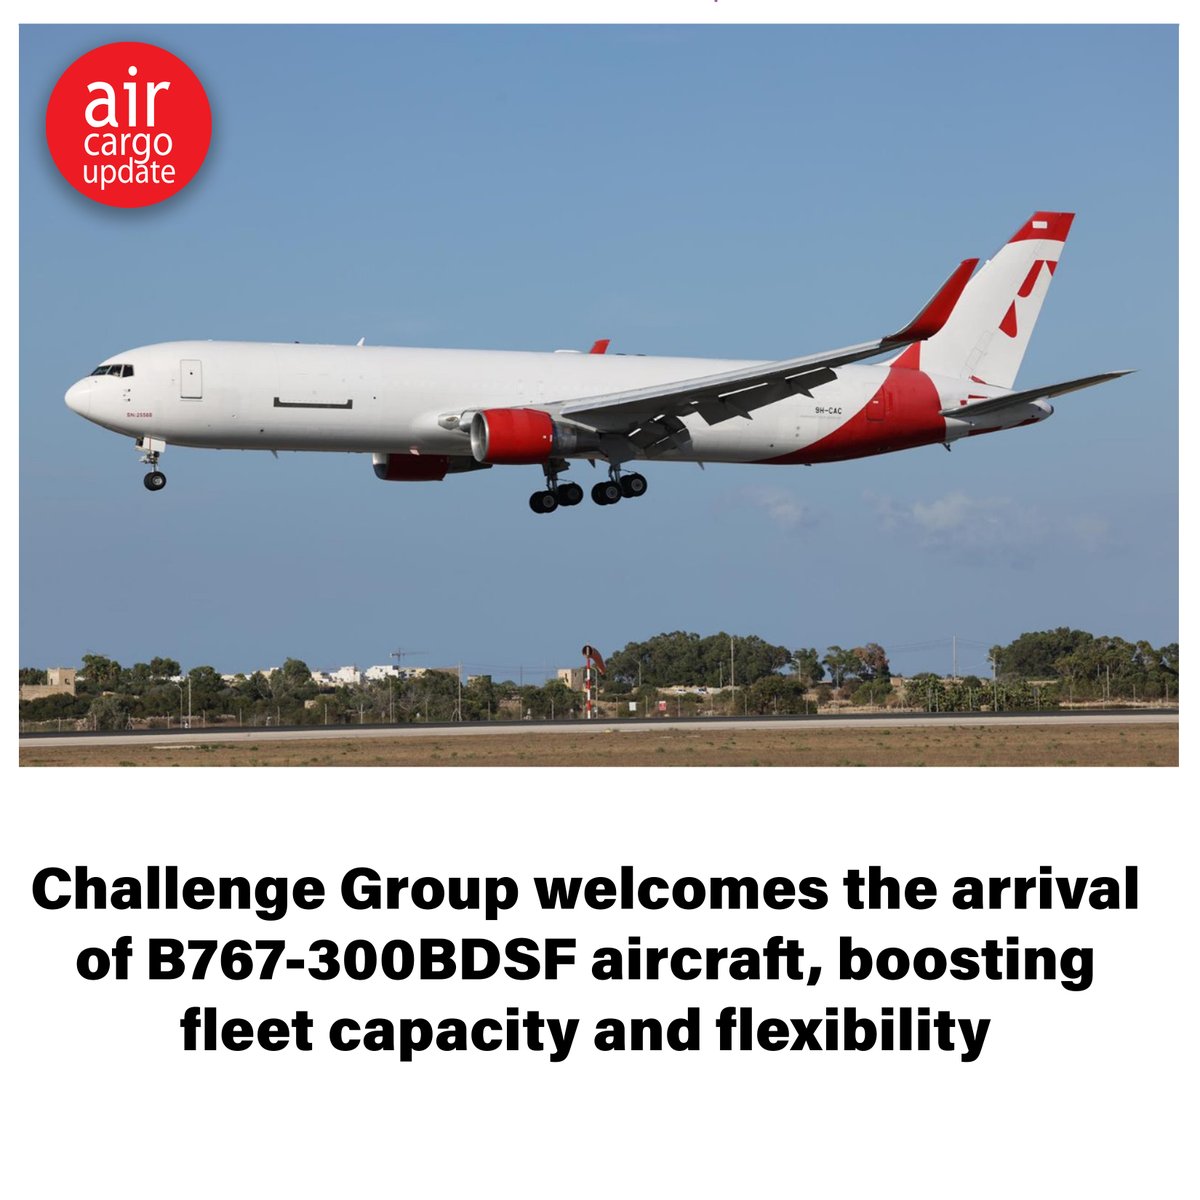 Challenge Group is thrilled to announce the latest addition to its fleet - the B767-300BDSF aircraft. Read More: aircargoupdate.com/challenge-... 

#challengegroup #challenge #aircargo #cargo #freight #aircargoupdate